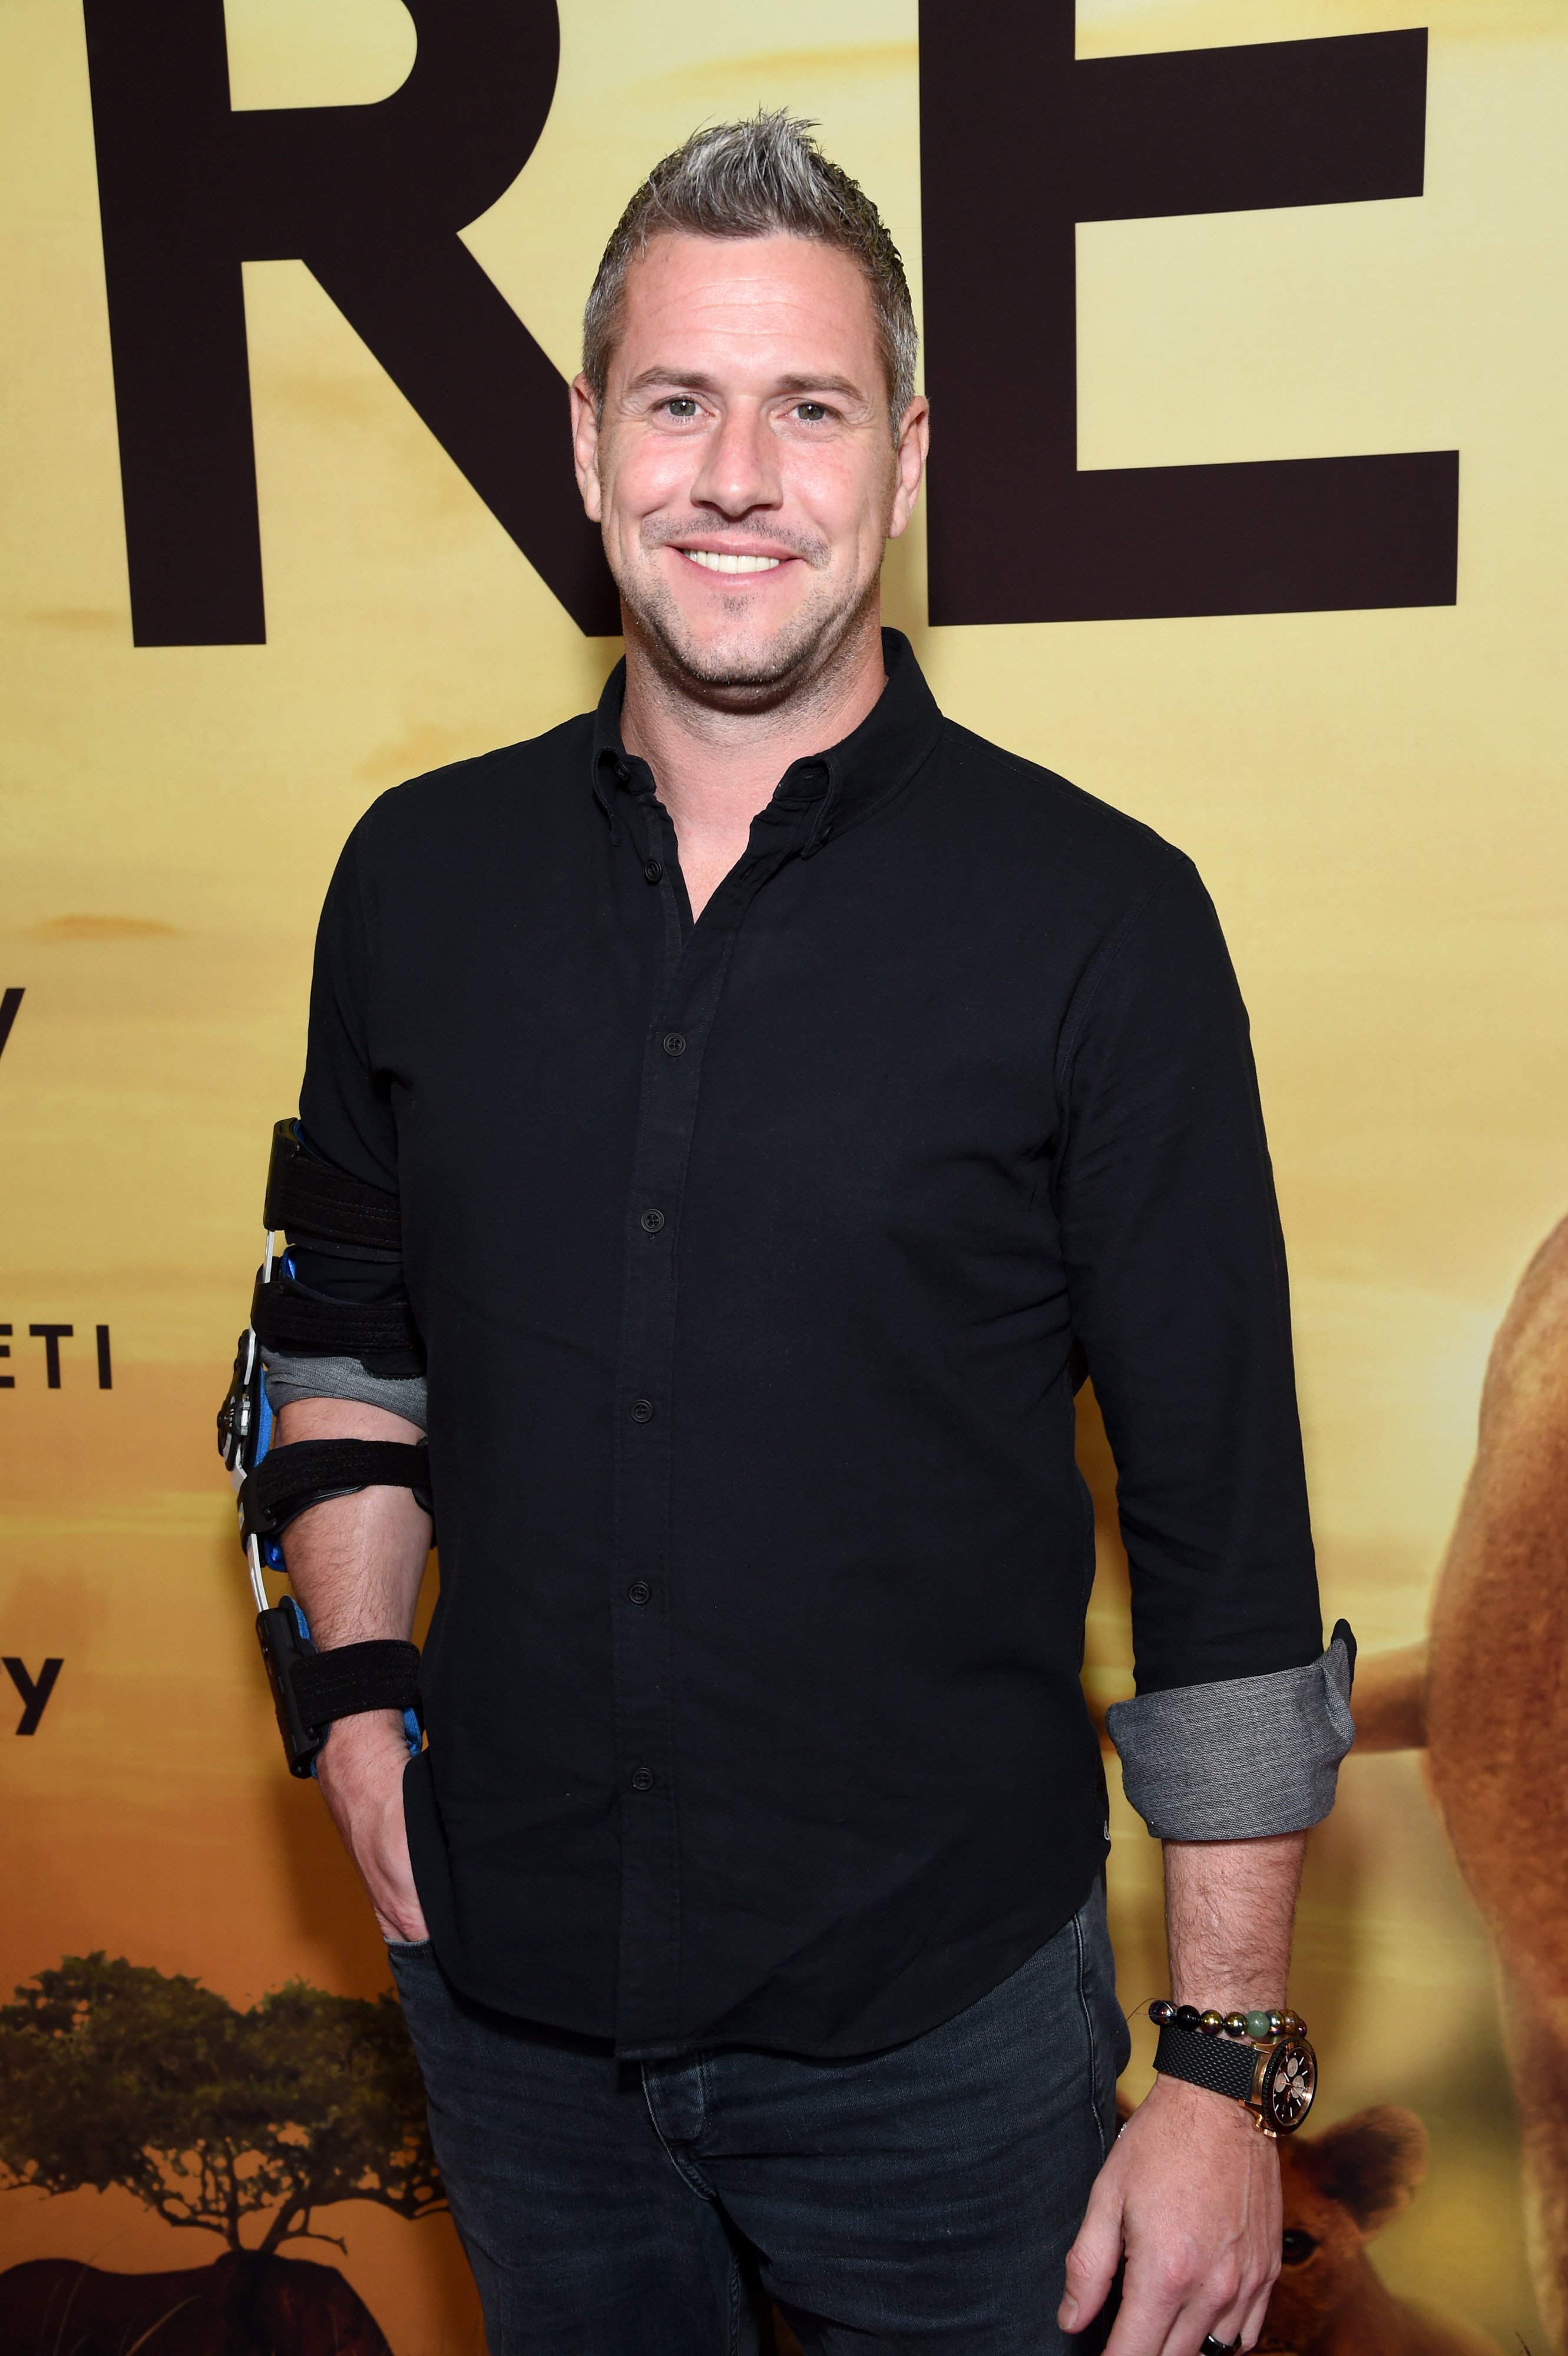 Ant Anstead pictured at the  Discovery's "Serengeti" premiere at Wallis Annenberg Center, July 2019. | Photo: Getty Images